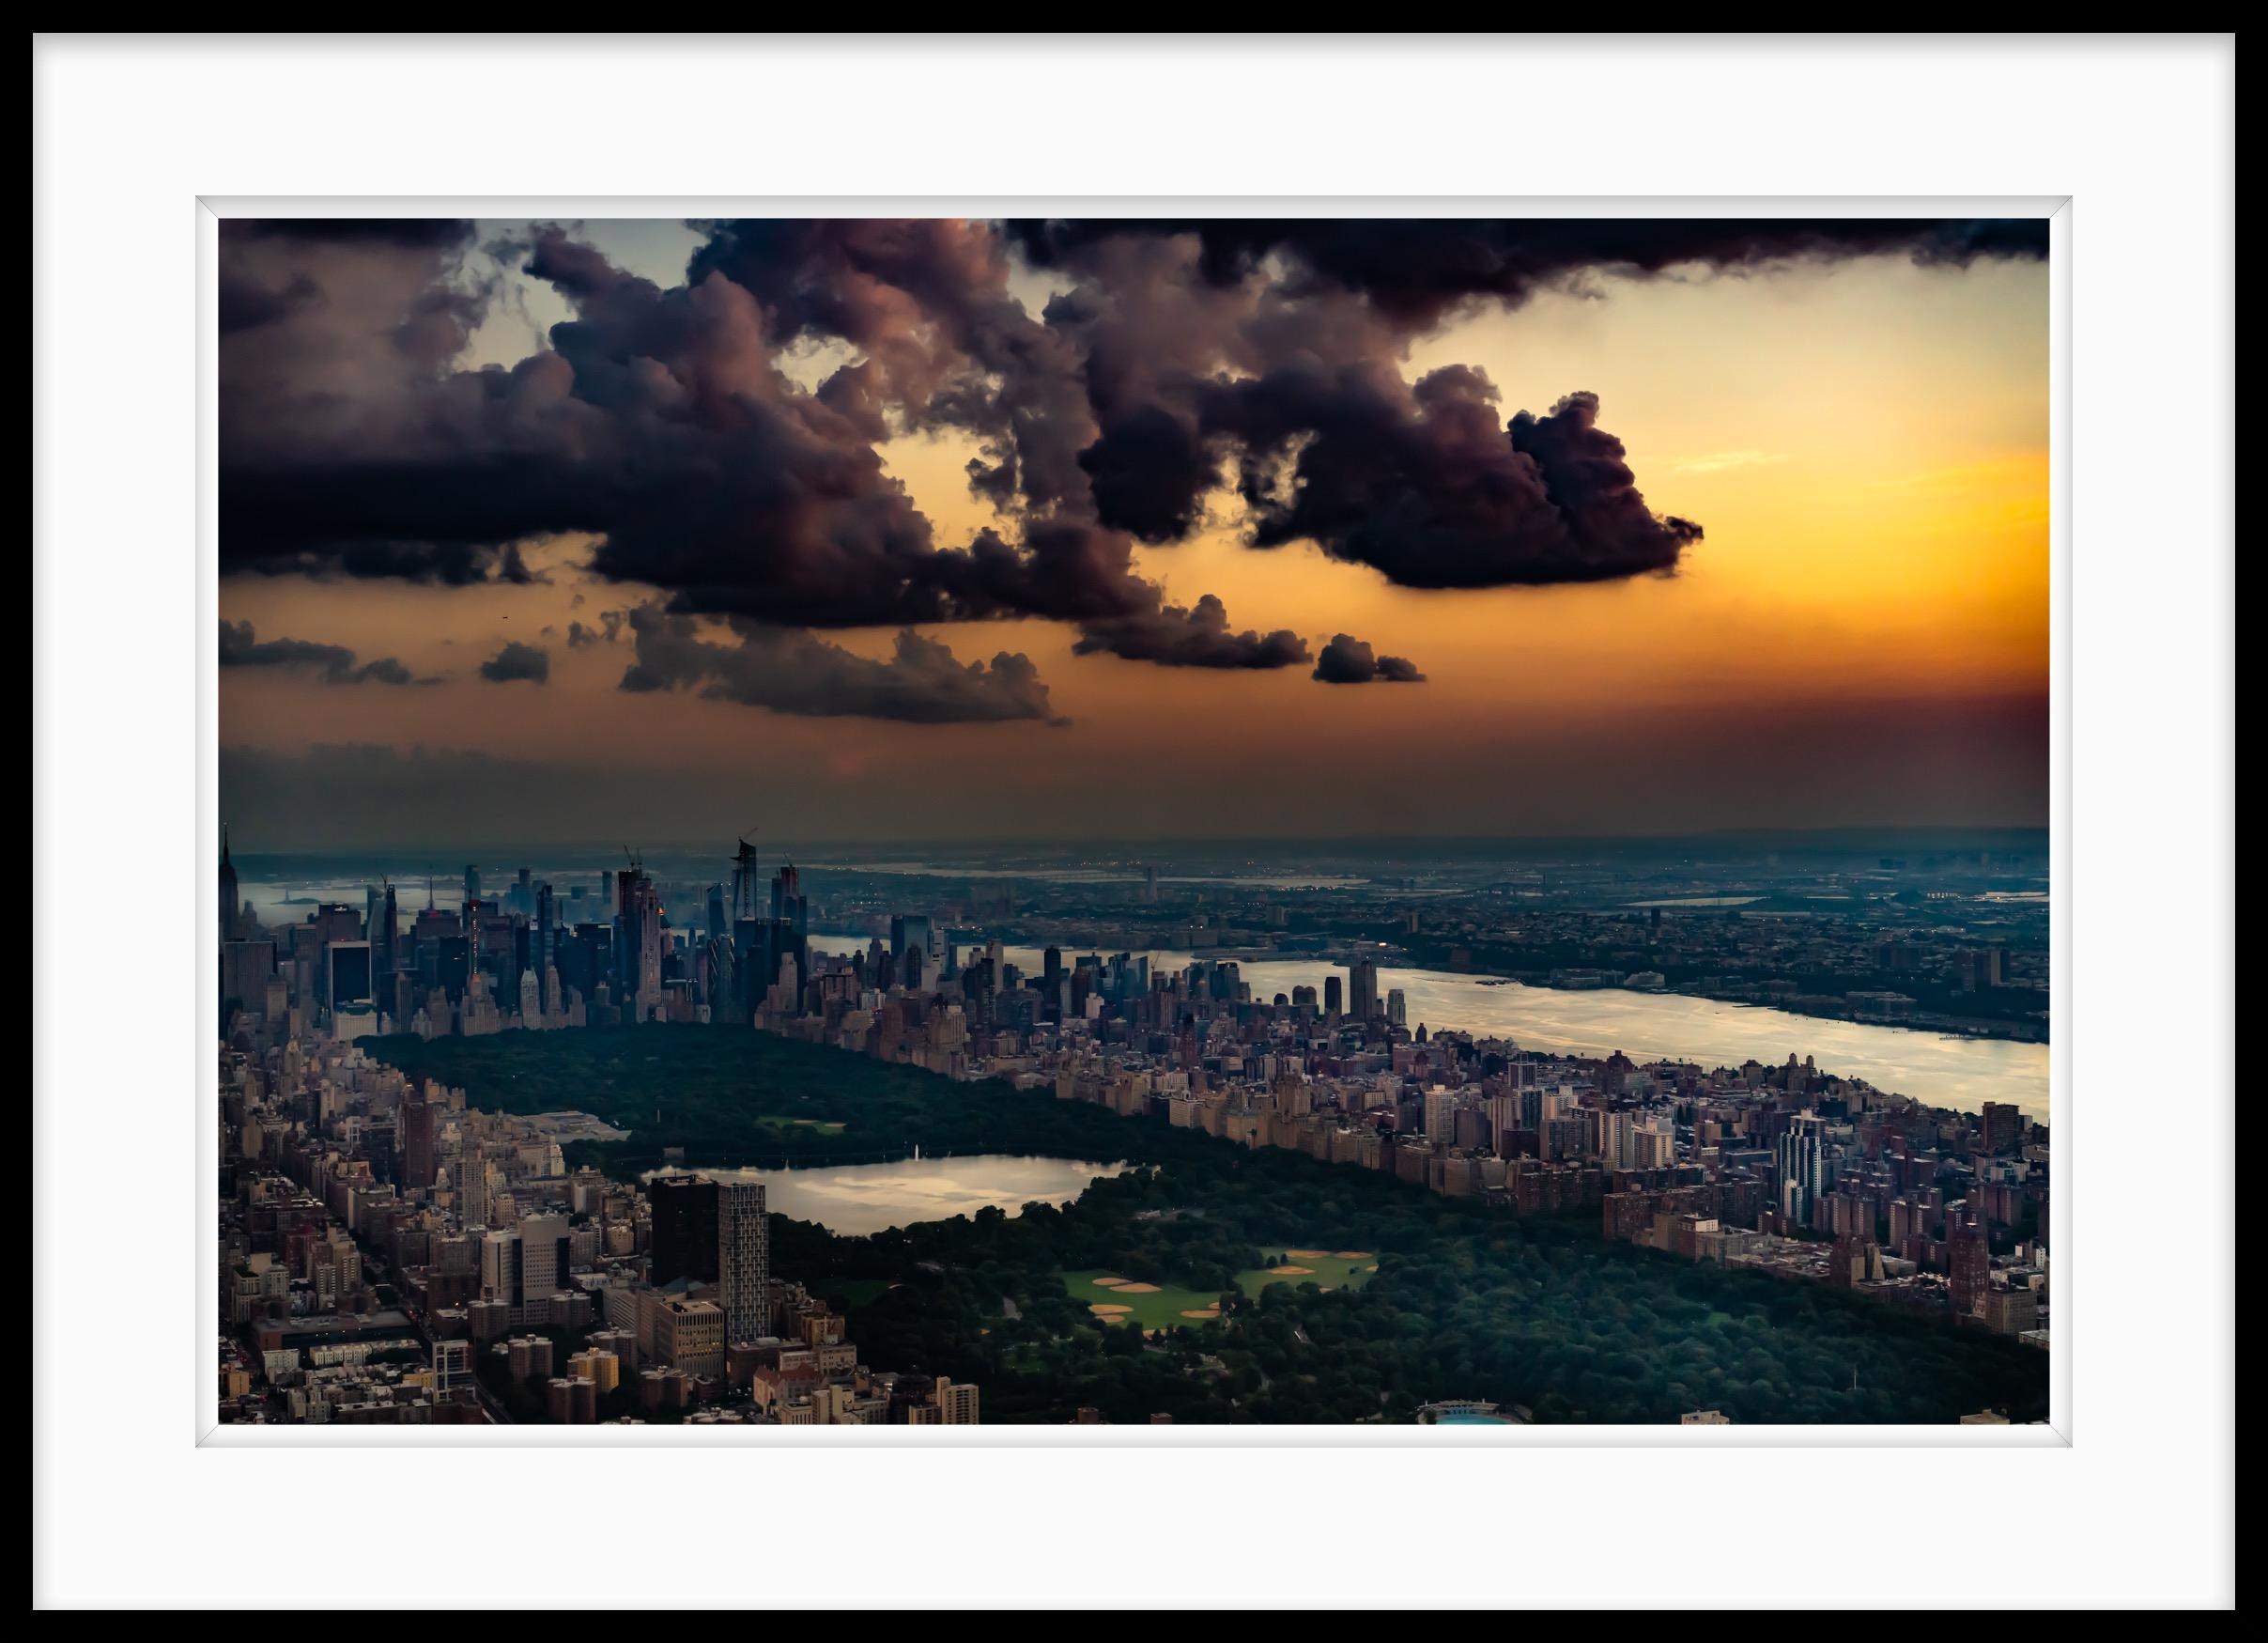 Limited Edition Color Photograph - New York aerial, Central Park, 2018. When the ban on taking the doors off of helicopters for photography was lifted I flew over New York City late in the day just after storms had passed. Central Park with the lake